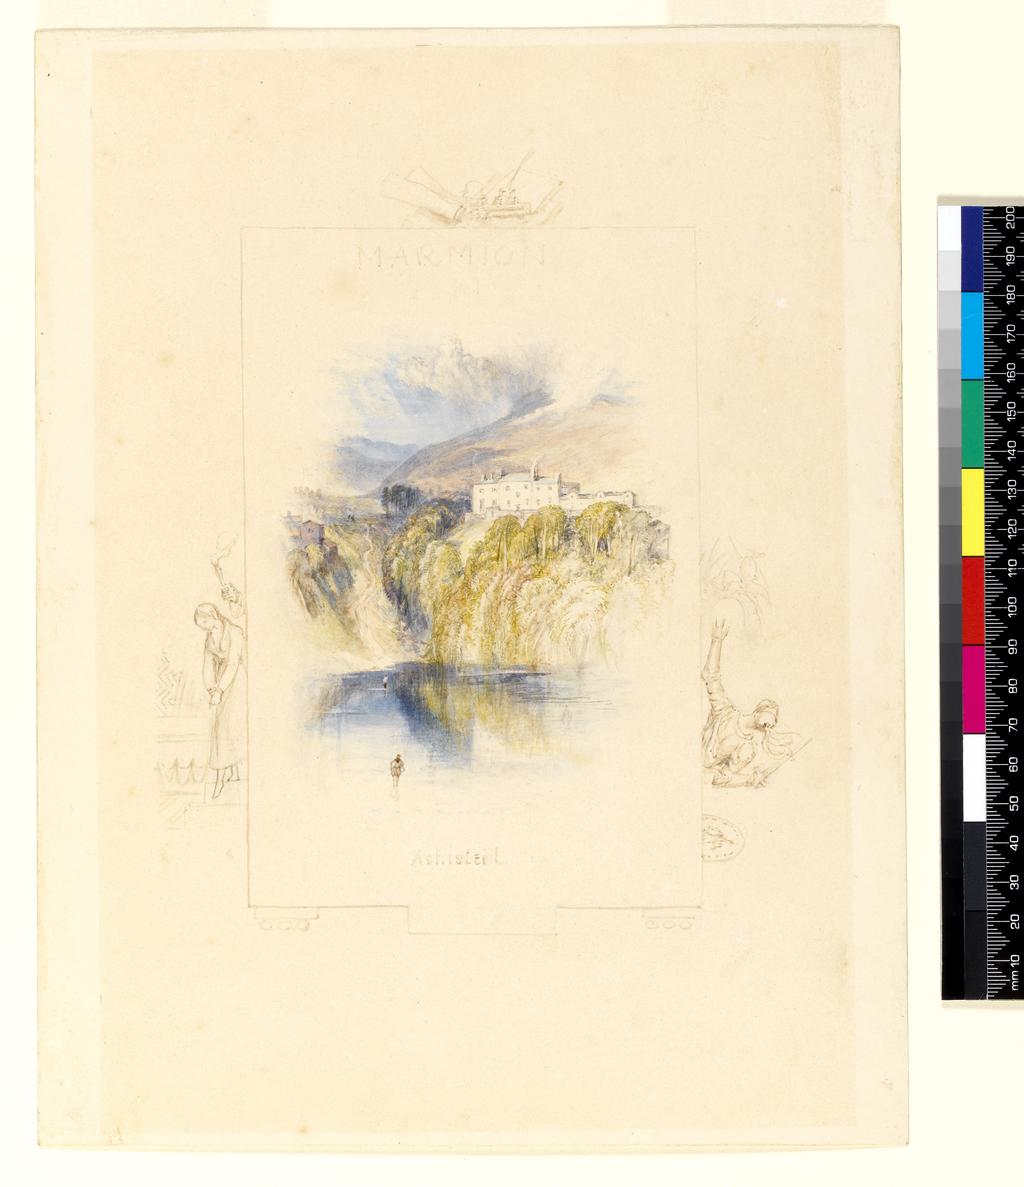 An image of Ashestiel. Turner, Joseph Mallord William (British, 1775-1851). Graphite and watercolour on card, height 287 mm, width 223 mm, 1831-1834.